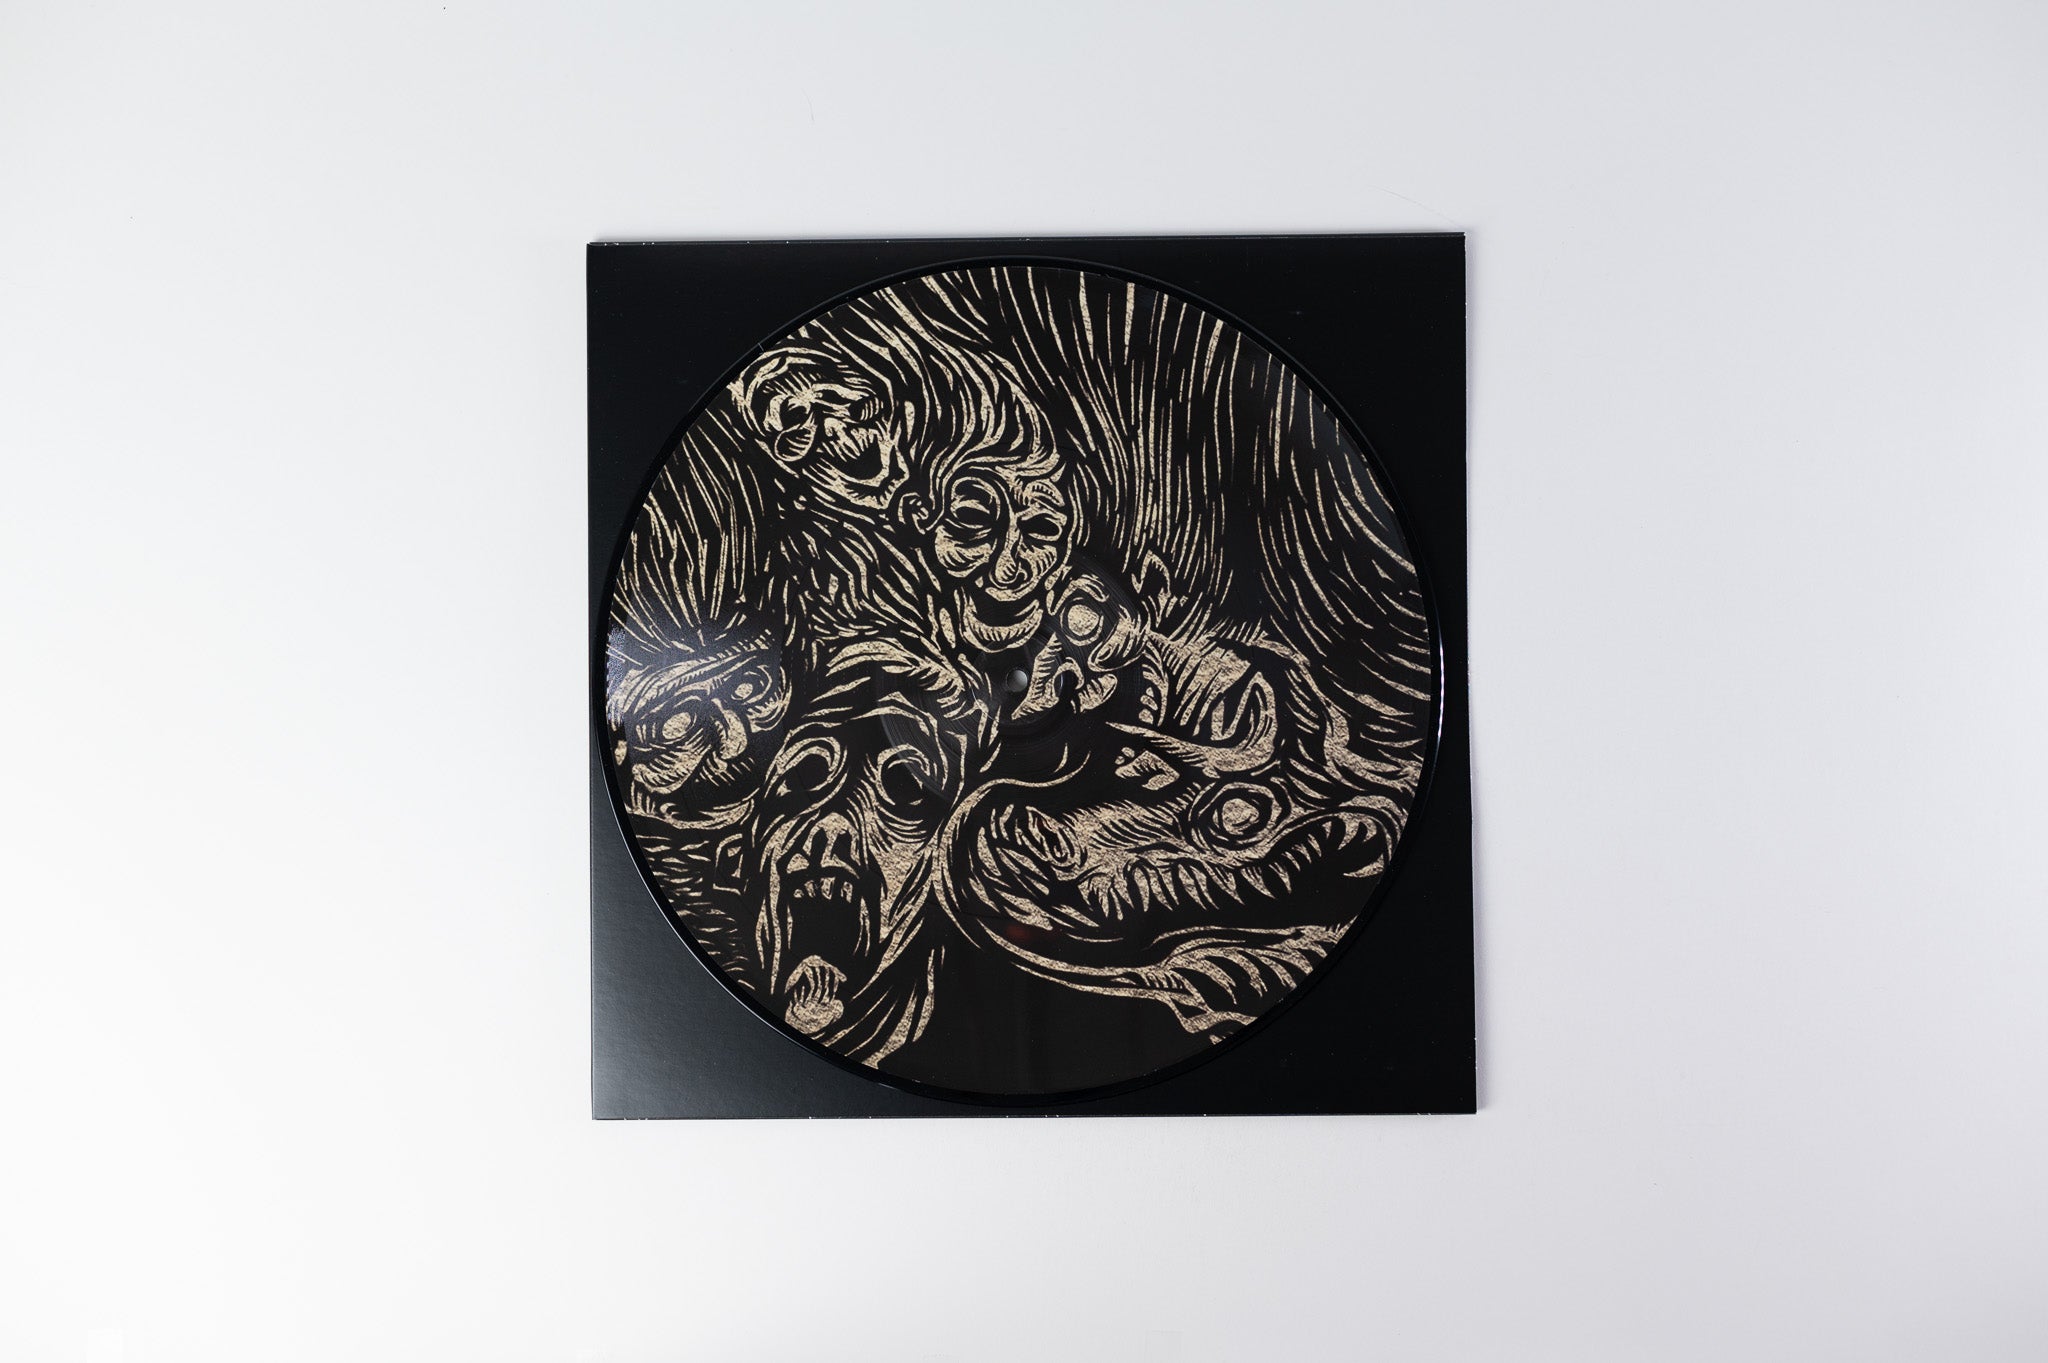 Cultes Des Ghoules - Coven, Or Evil Ways Instead Of Love on Hells Headbangers Picture Disc Box Set